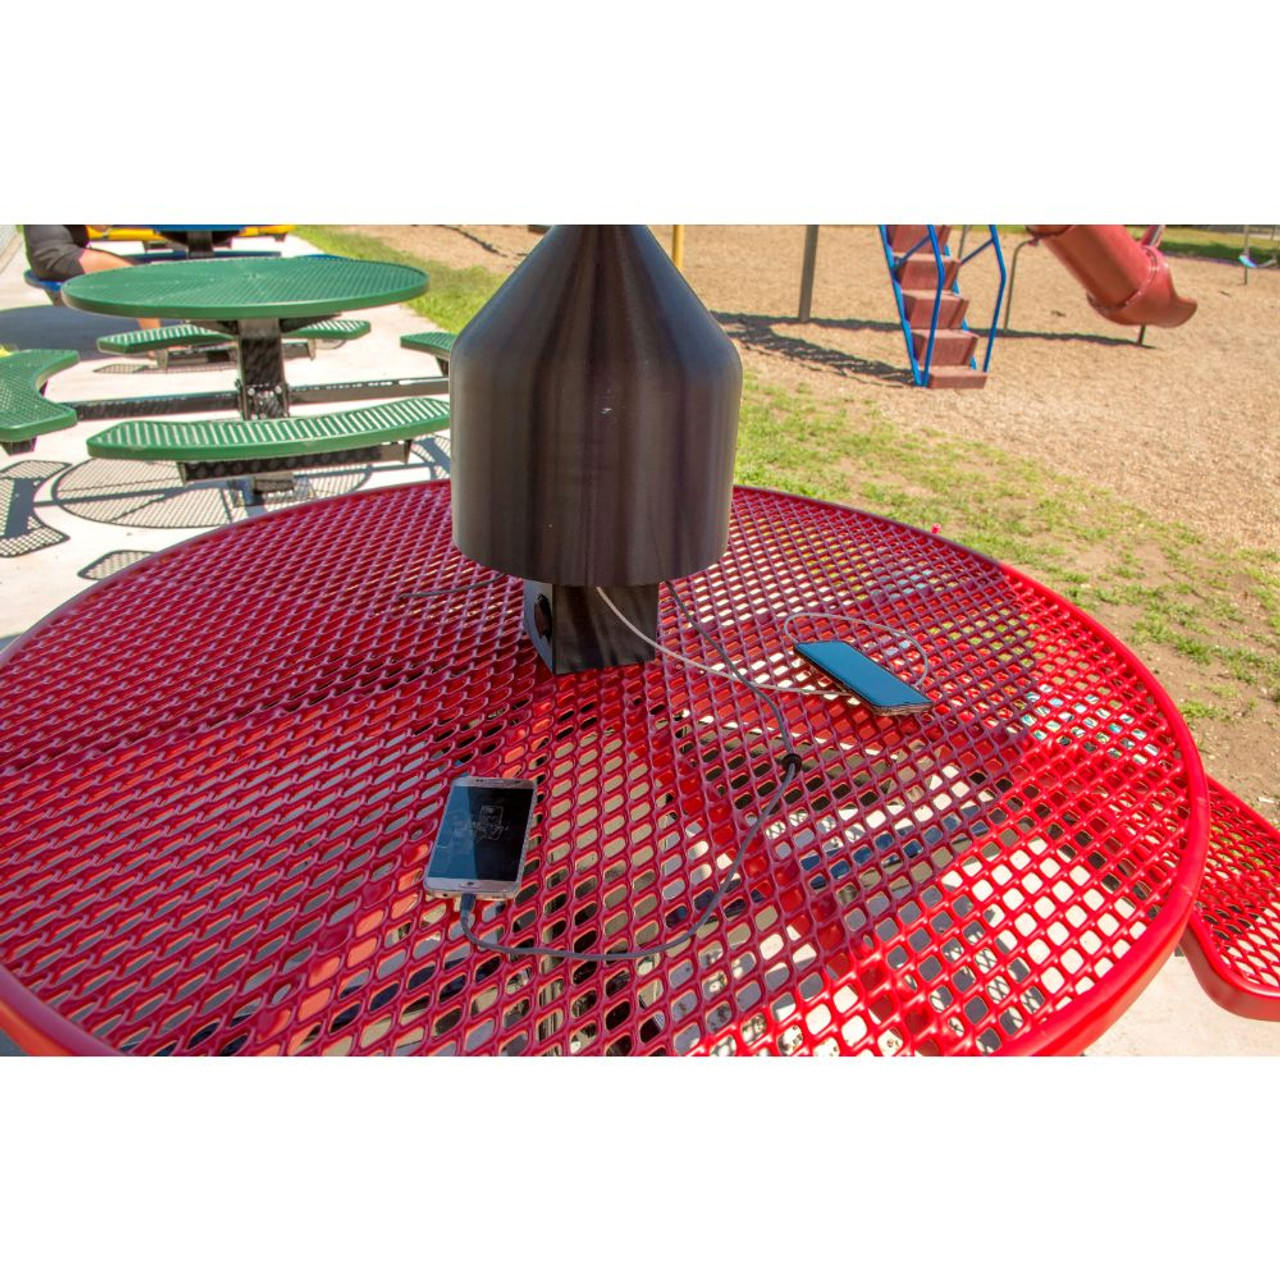 Solar Charge Station with Fiberglass Umbrella - in use - table not included